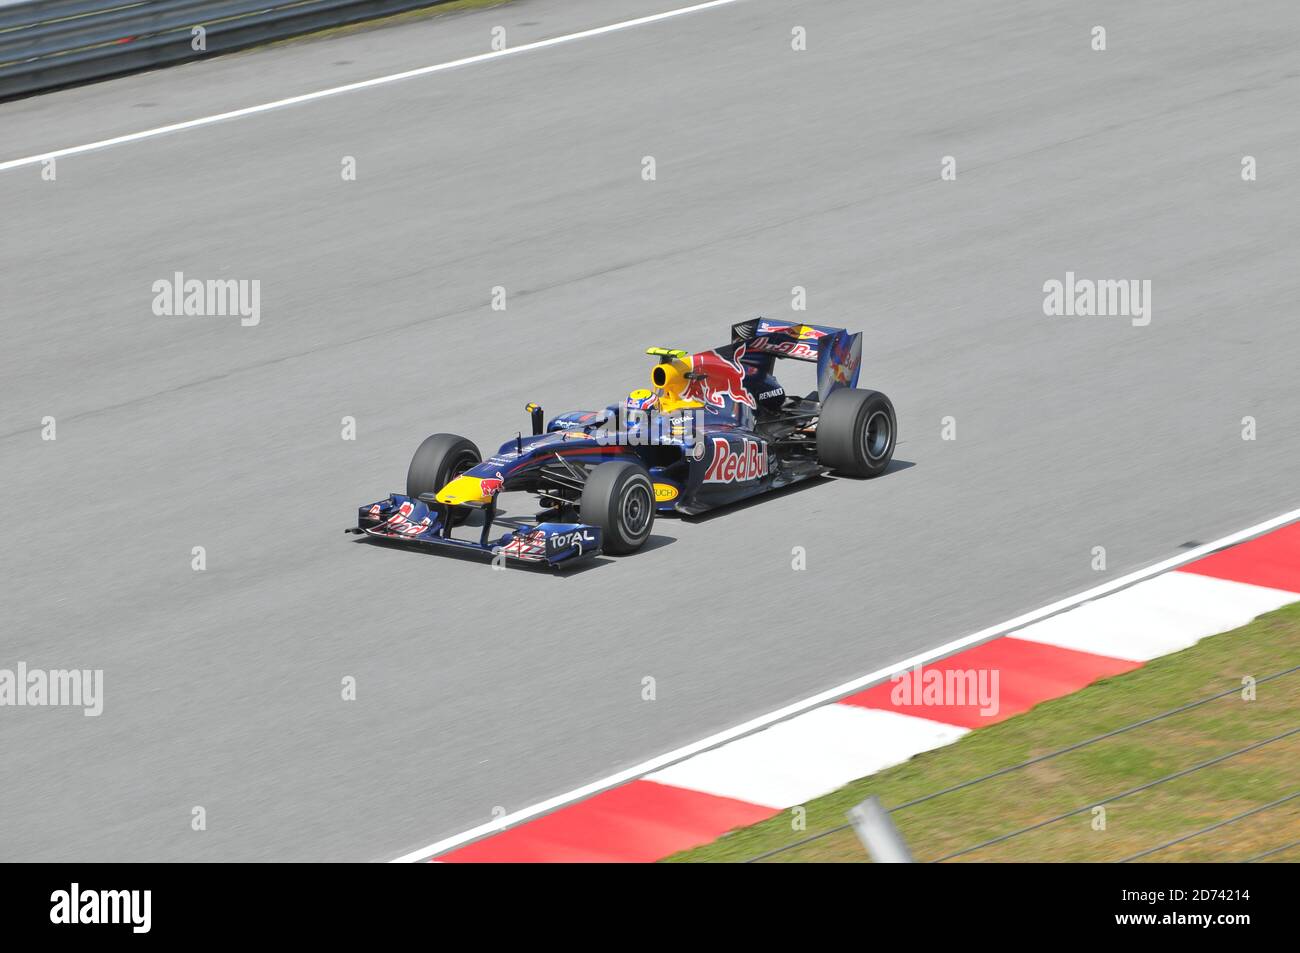 SEPANG, MALAYSIA - APRIL 2 : Red Bull Racing driver Mark Webber of Australia drives during the first practice session at the Sepang F1 circuit April 2 Stock Photo